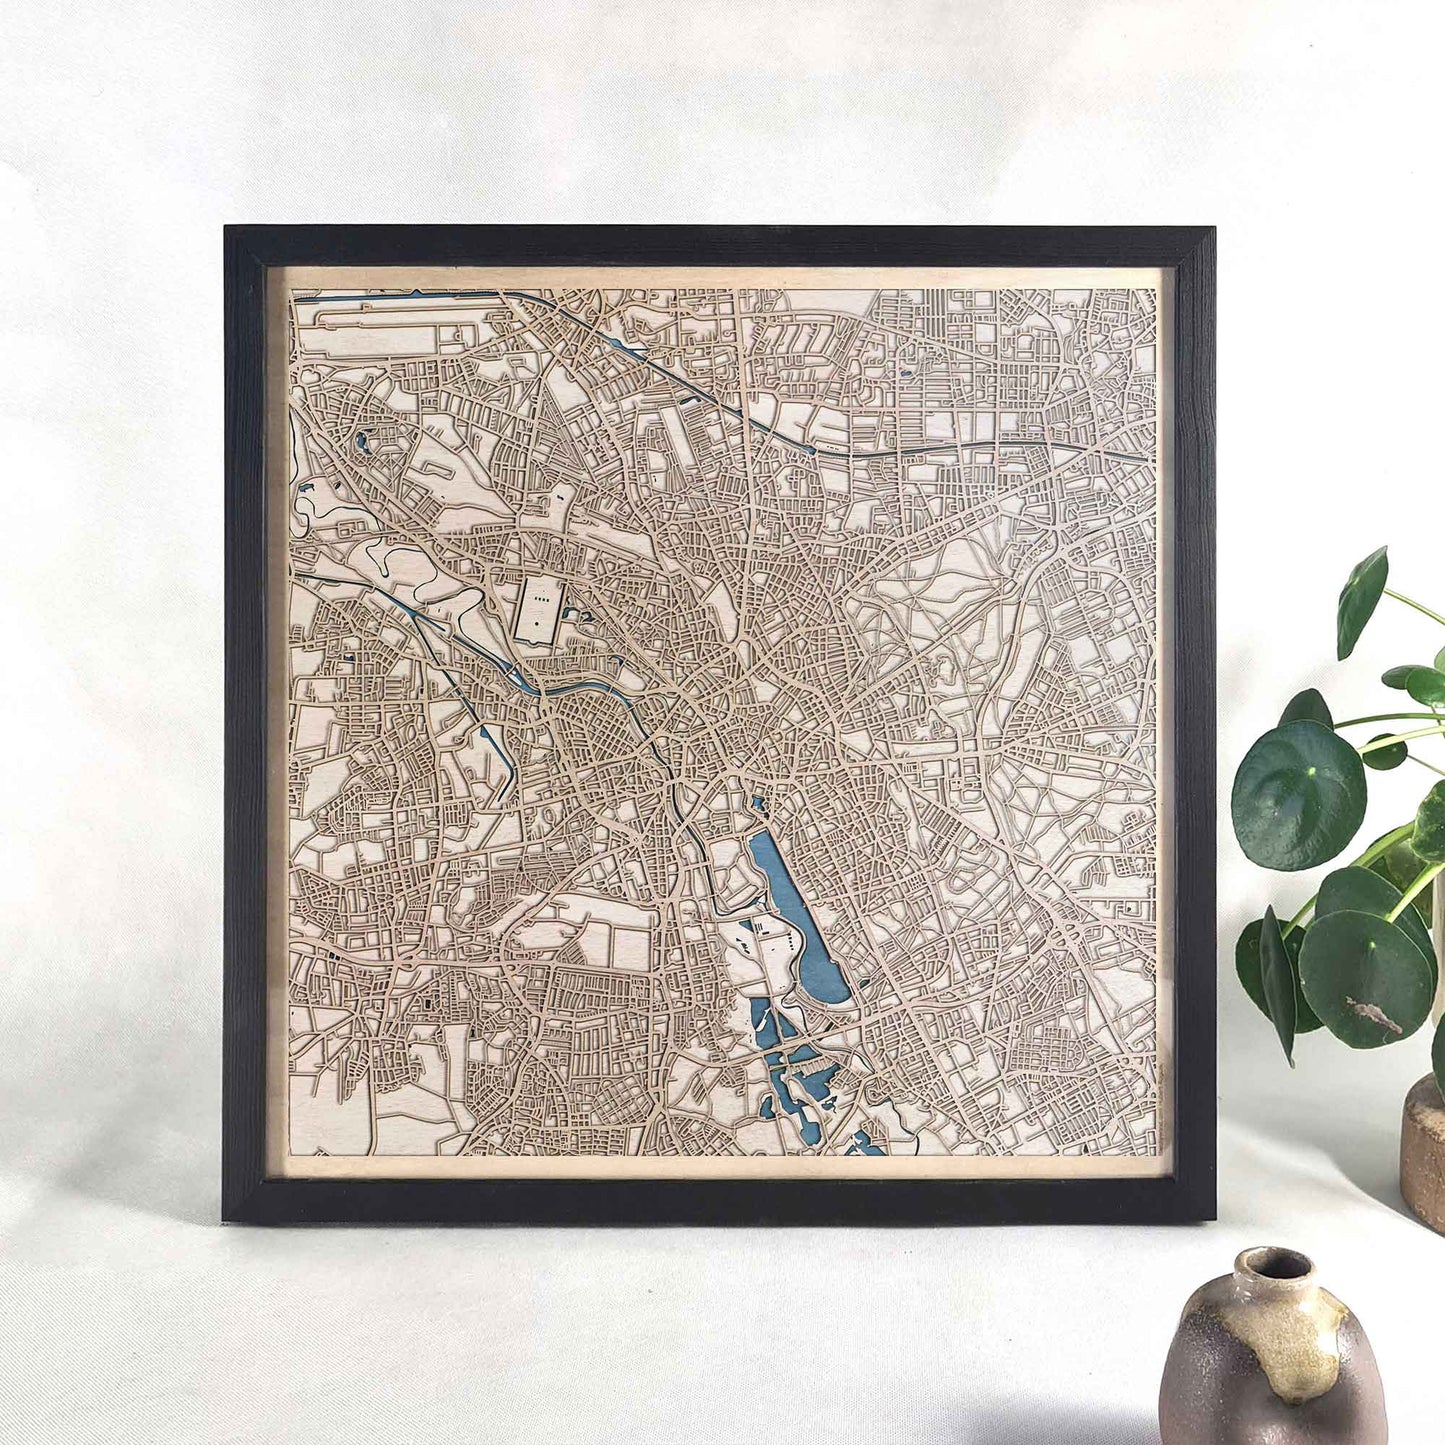 Hanover Wooden Map by CityWood - Custom Wood Map Art - Unique Laser Cut Engraved - Anniversary Gift